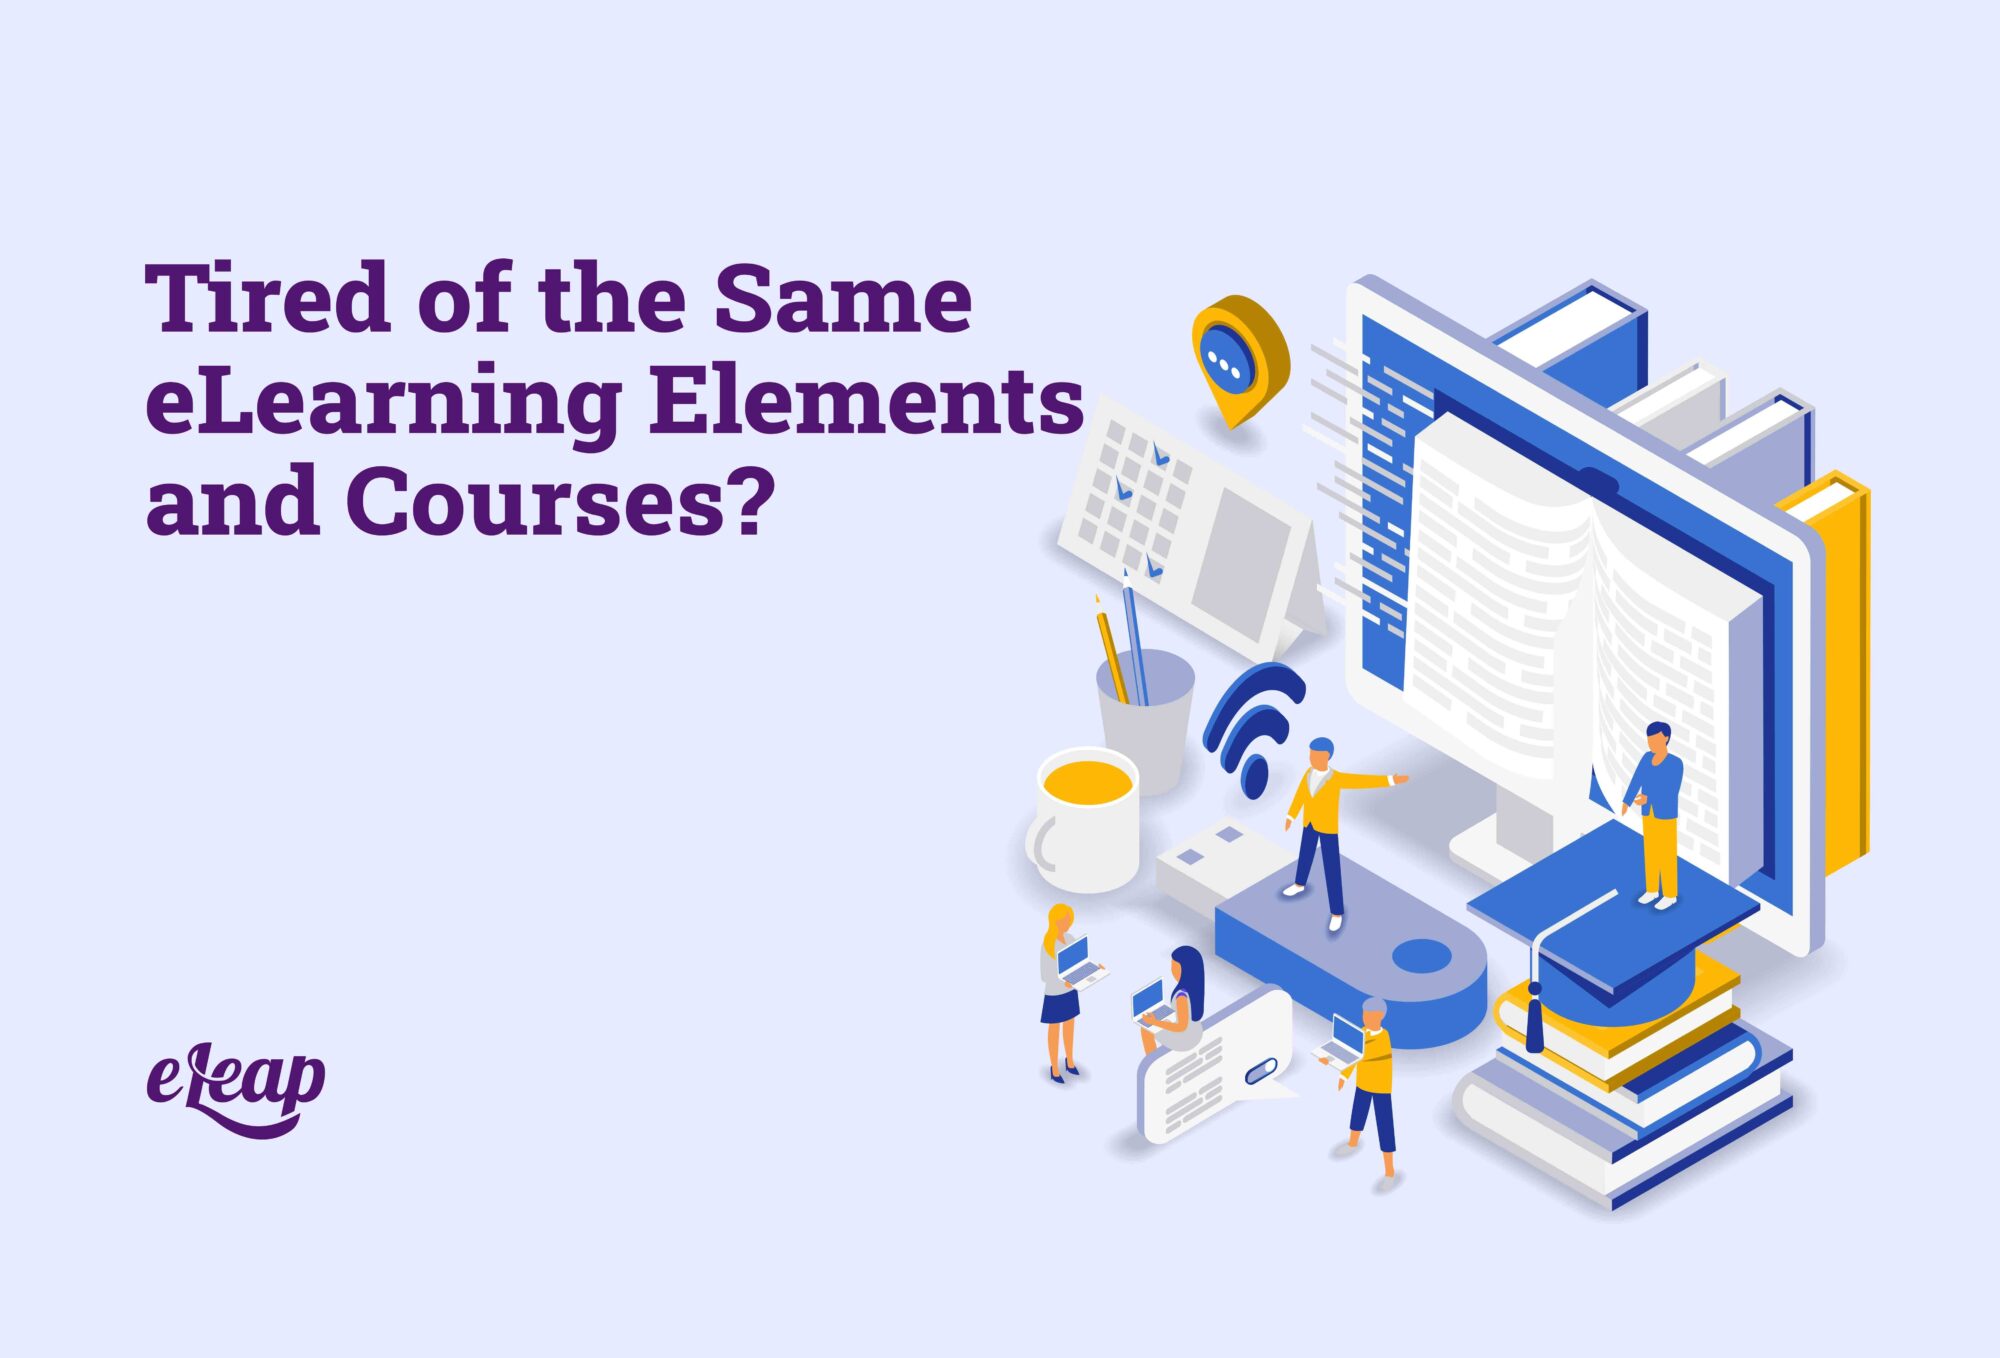 Tired of the Same eLearning Elements and Courses?